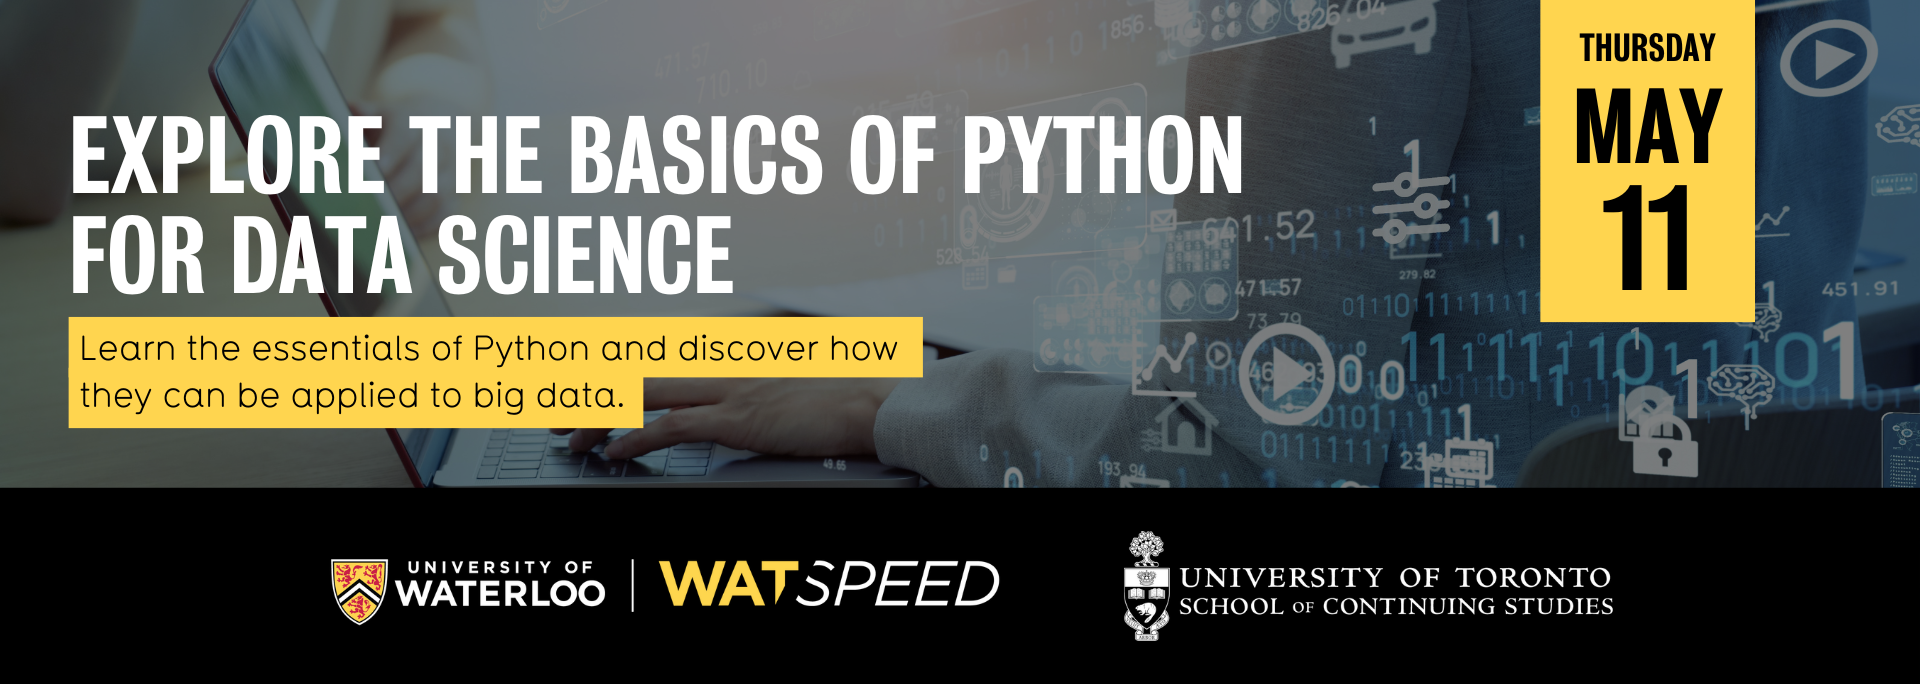 Learn essential Python skills and see how they apply to data science